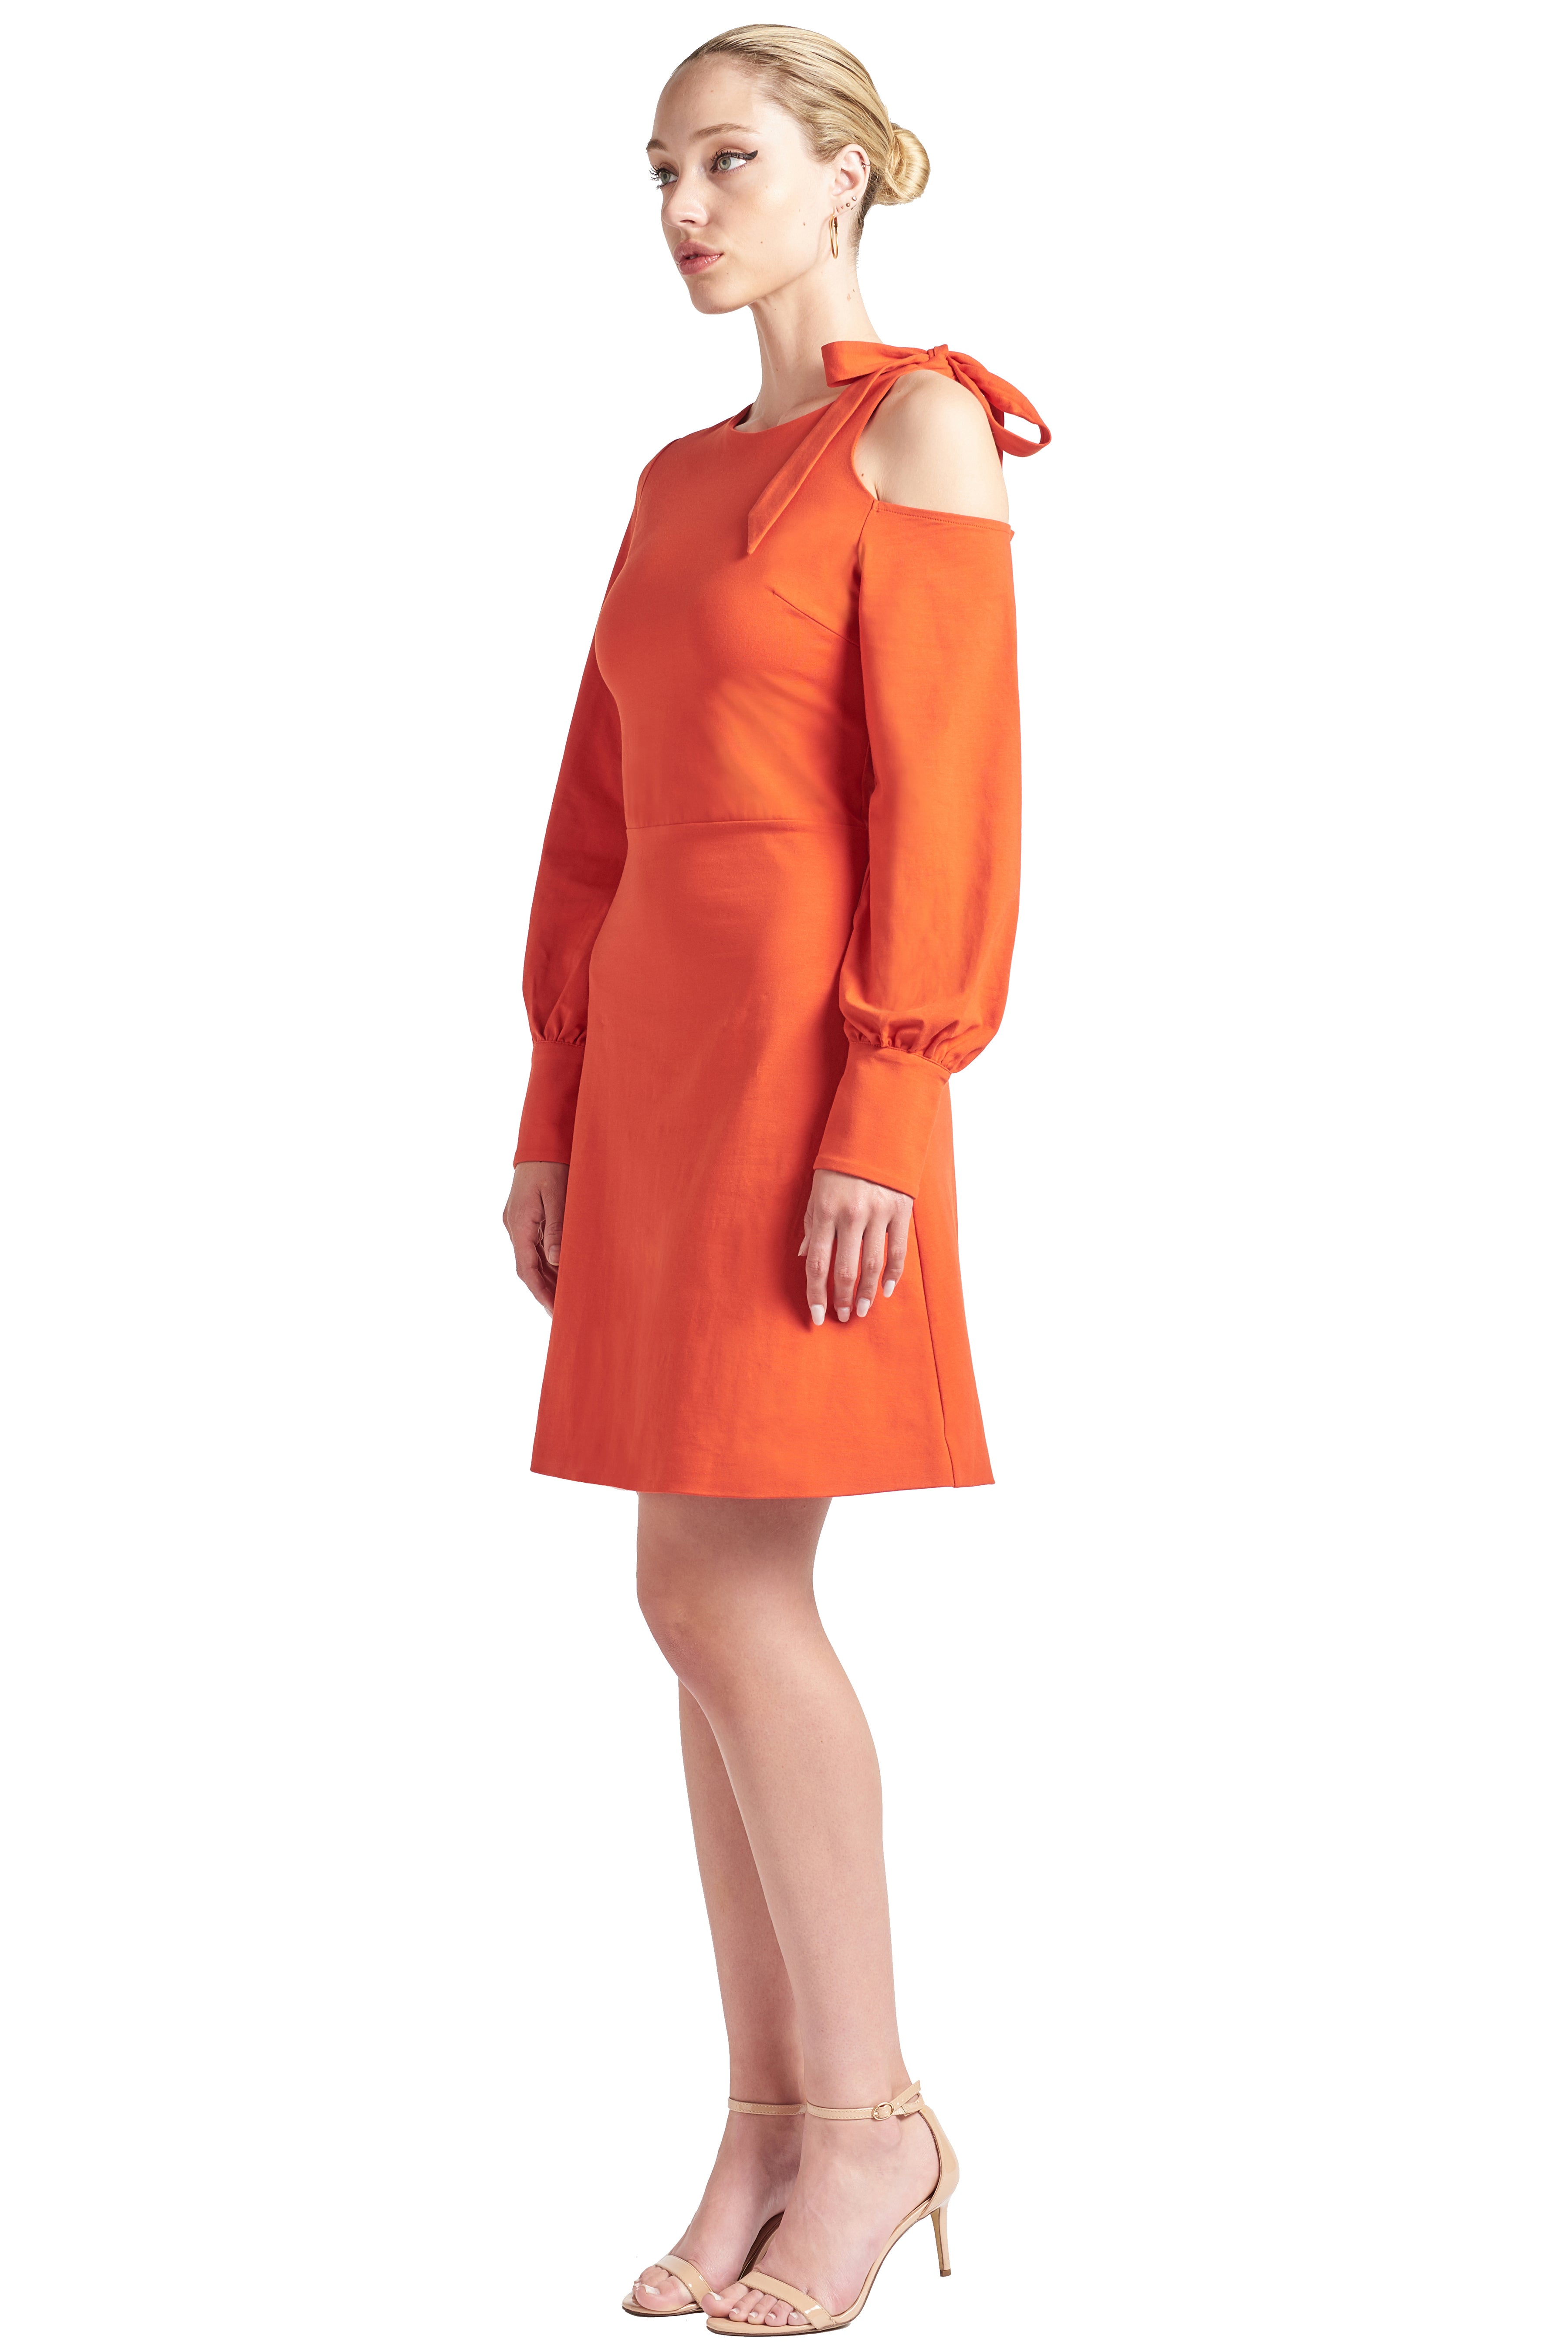 Model wearing fit & flare orange colored long sleeve dress with single shoulder cut-out and shoulder bow-tie.